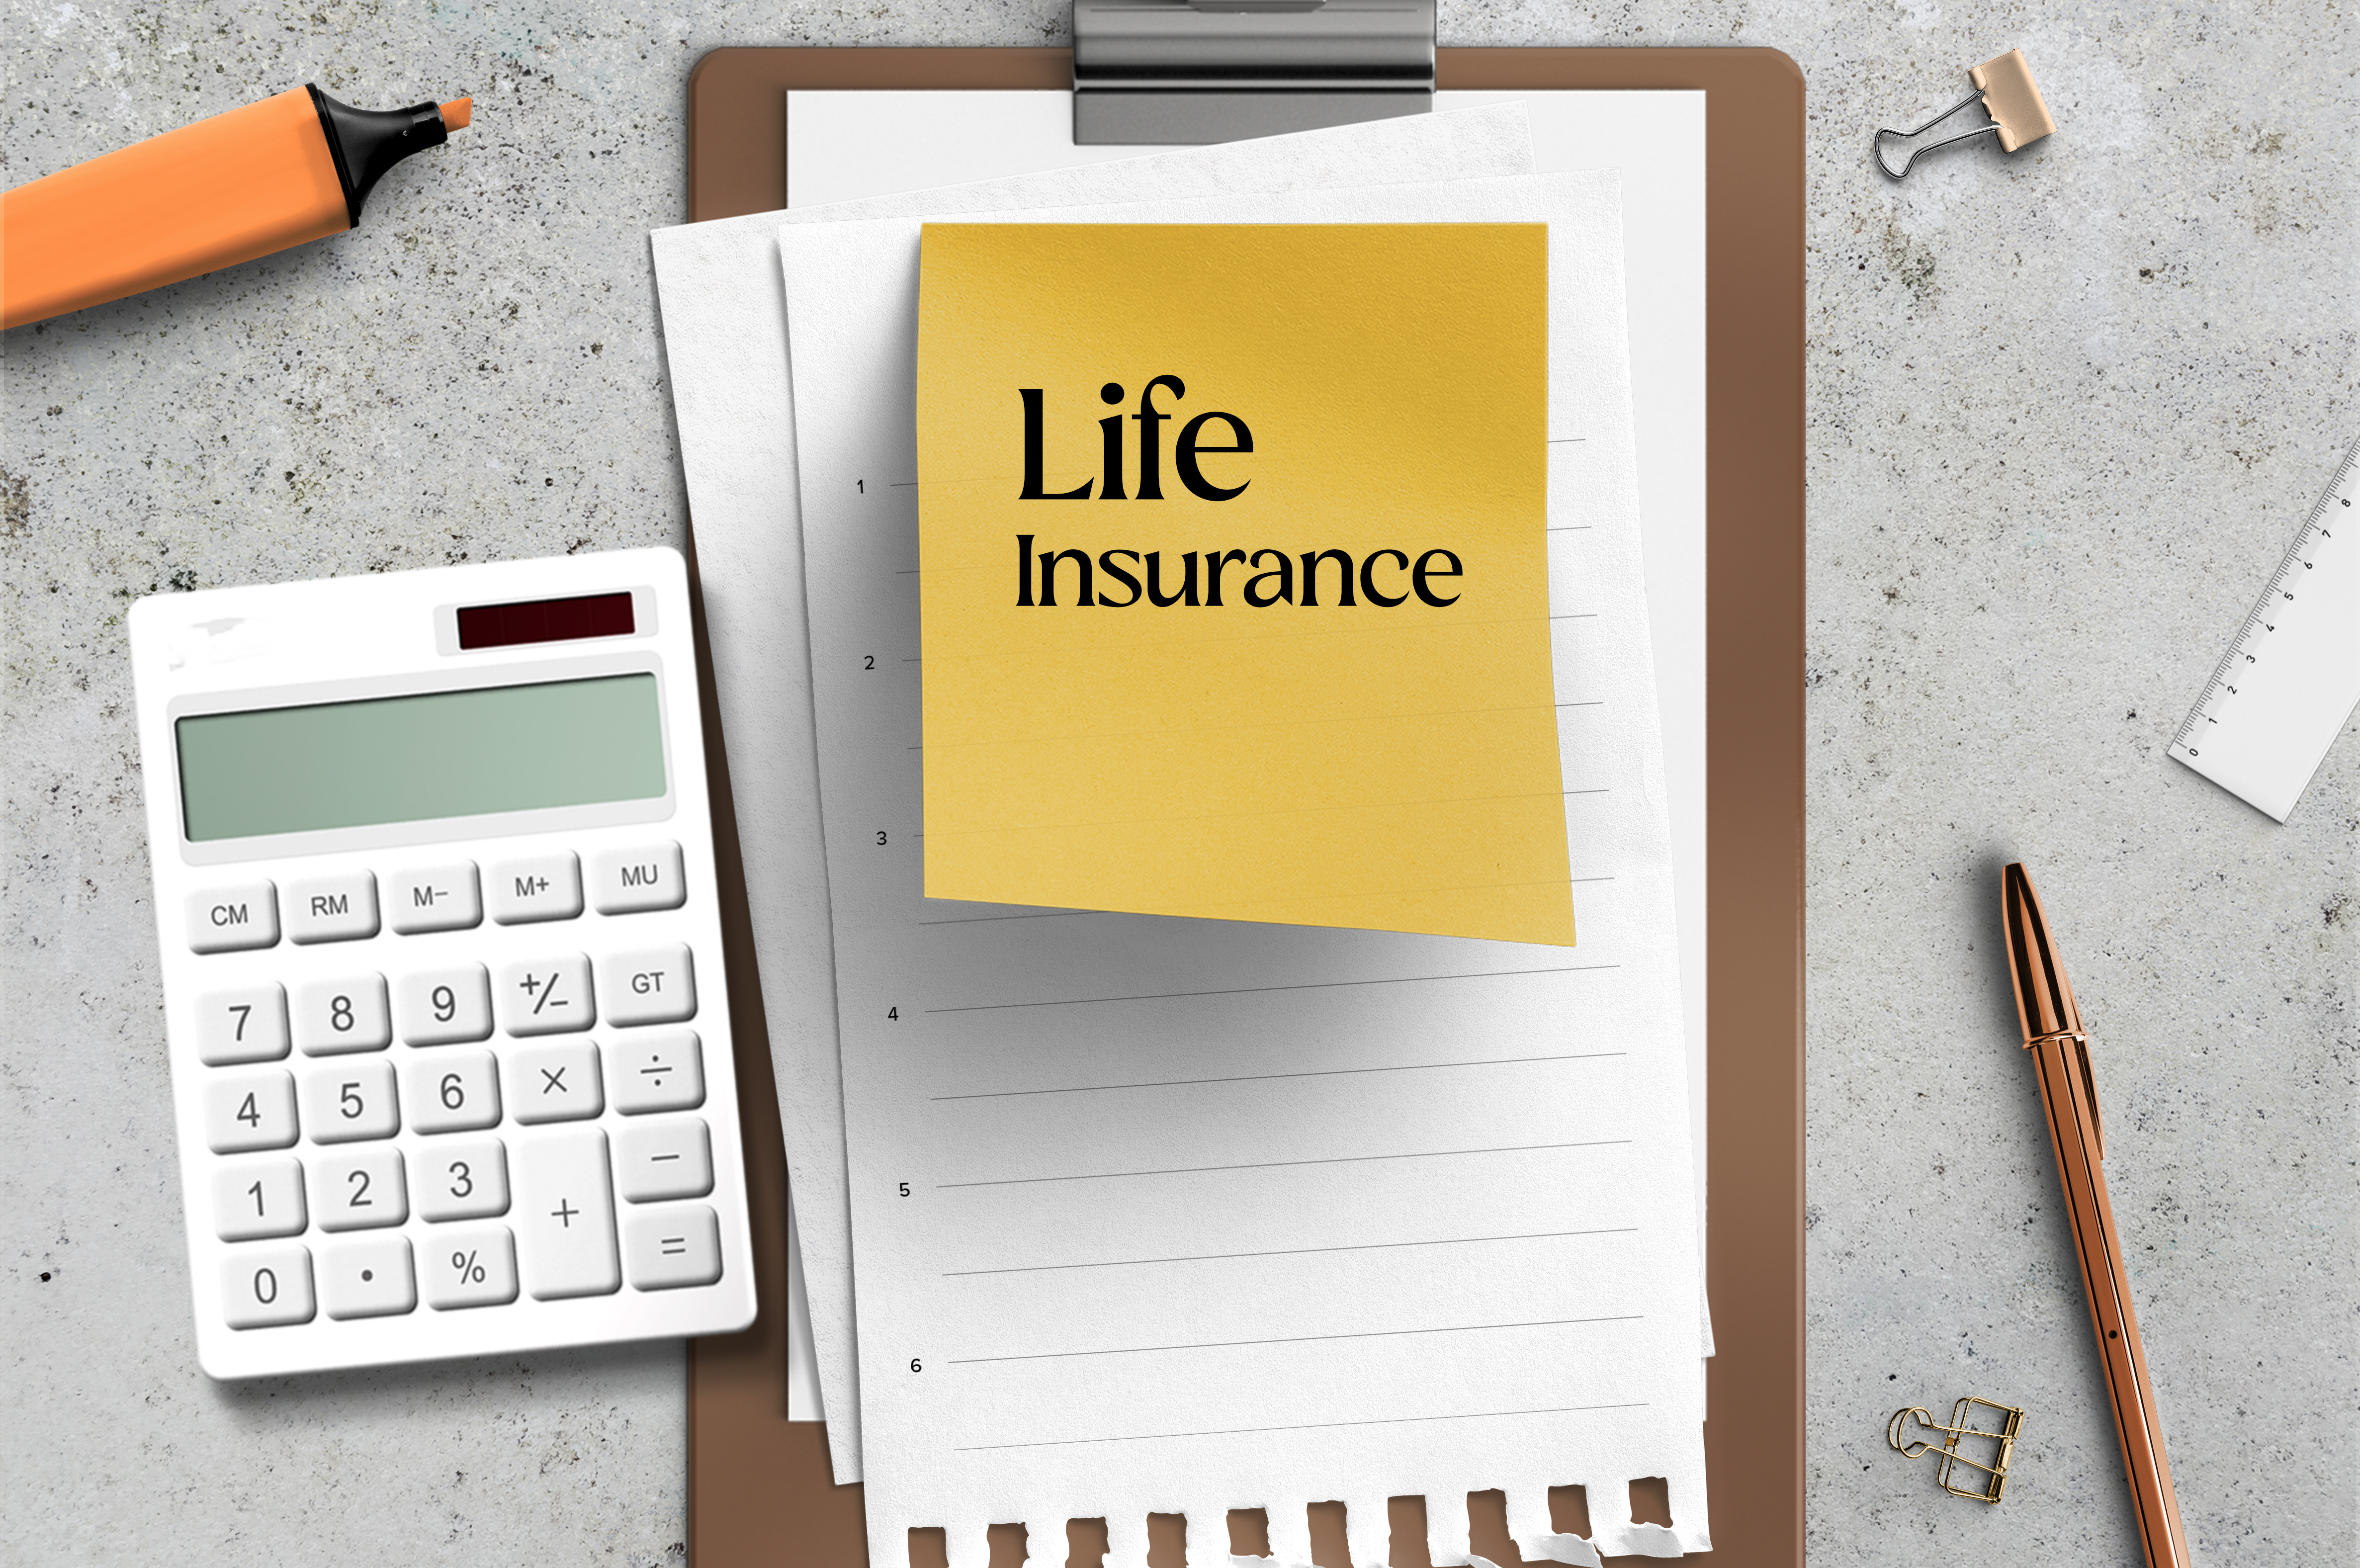 How to Shop for Life Insurance in 3 Easy Steps